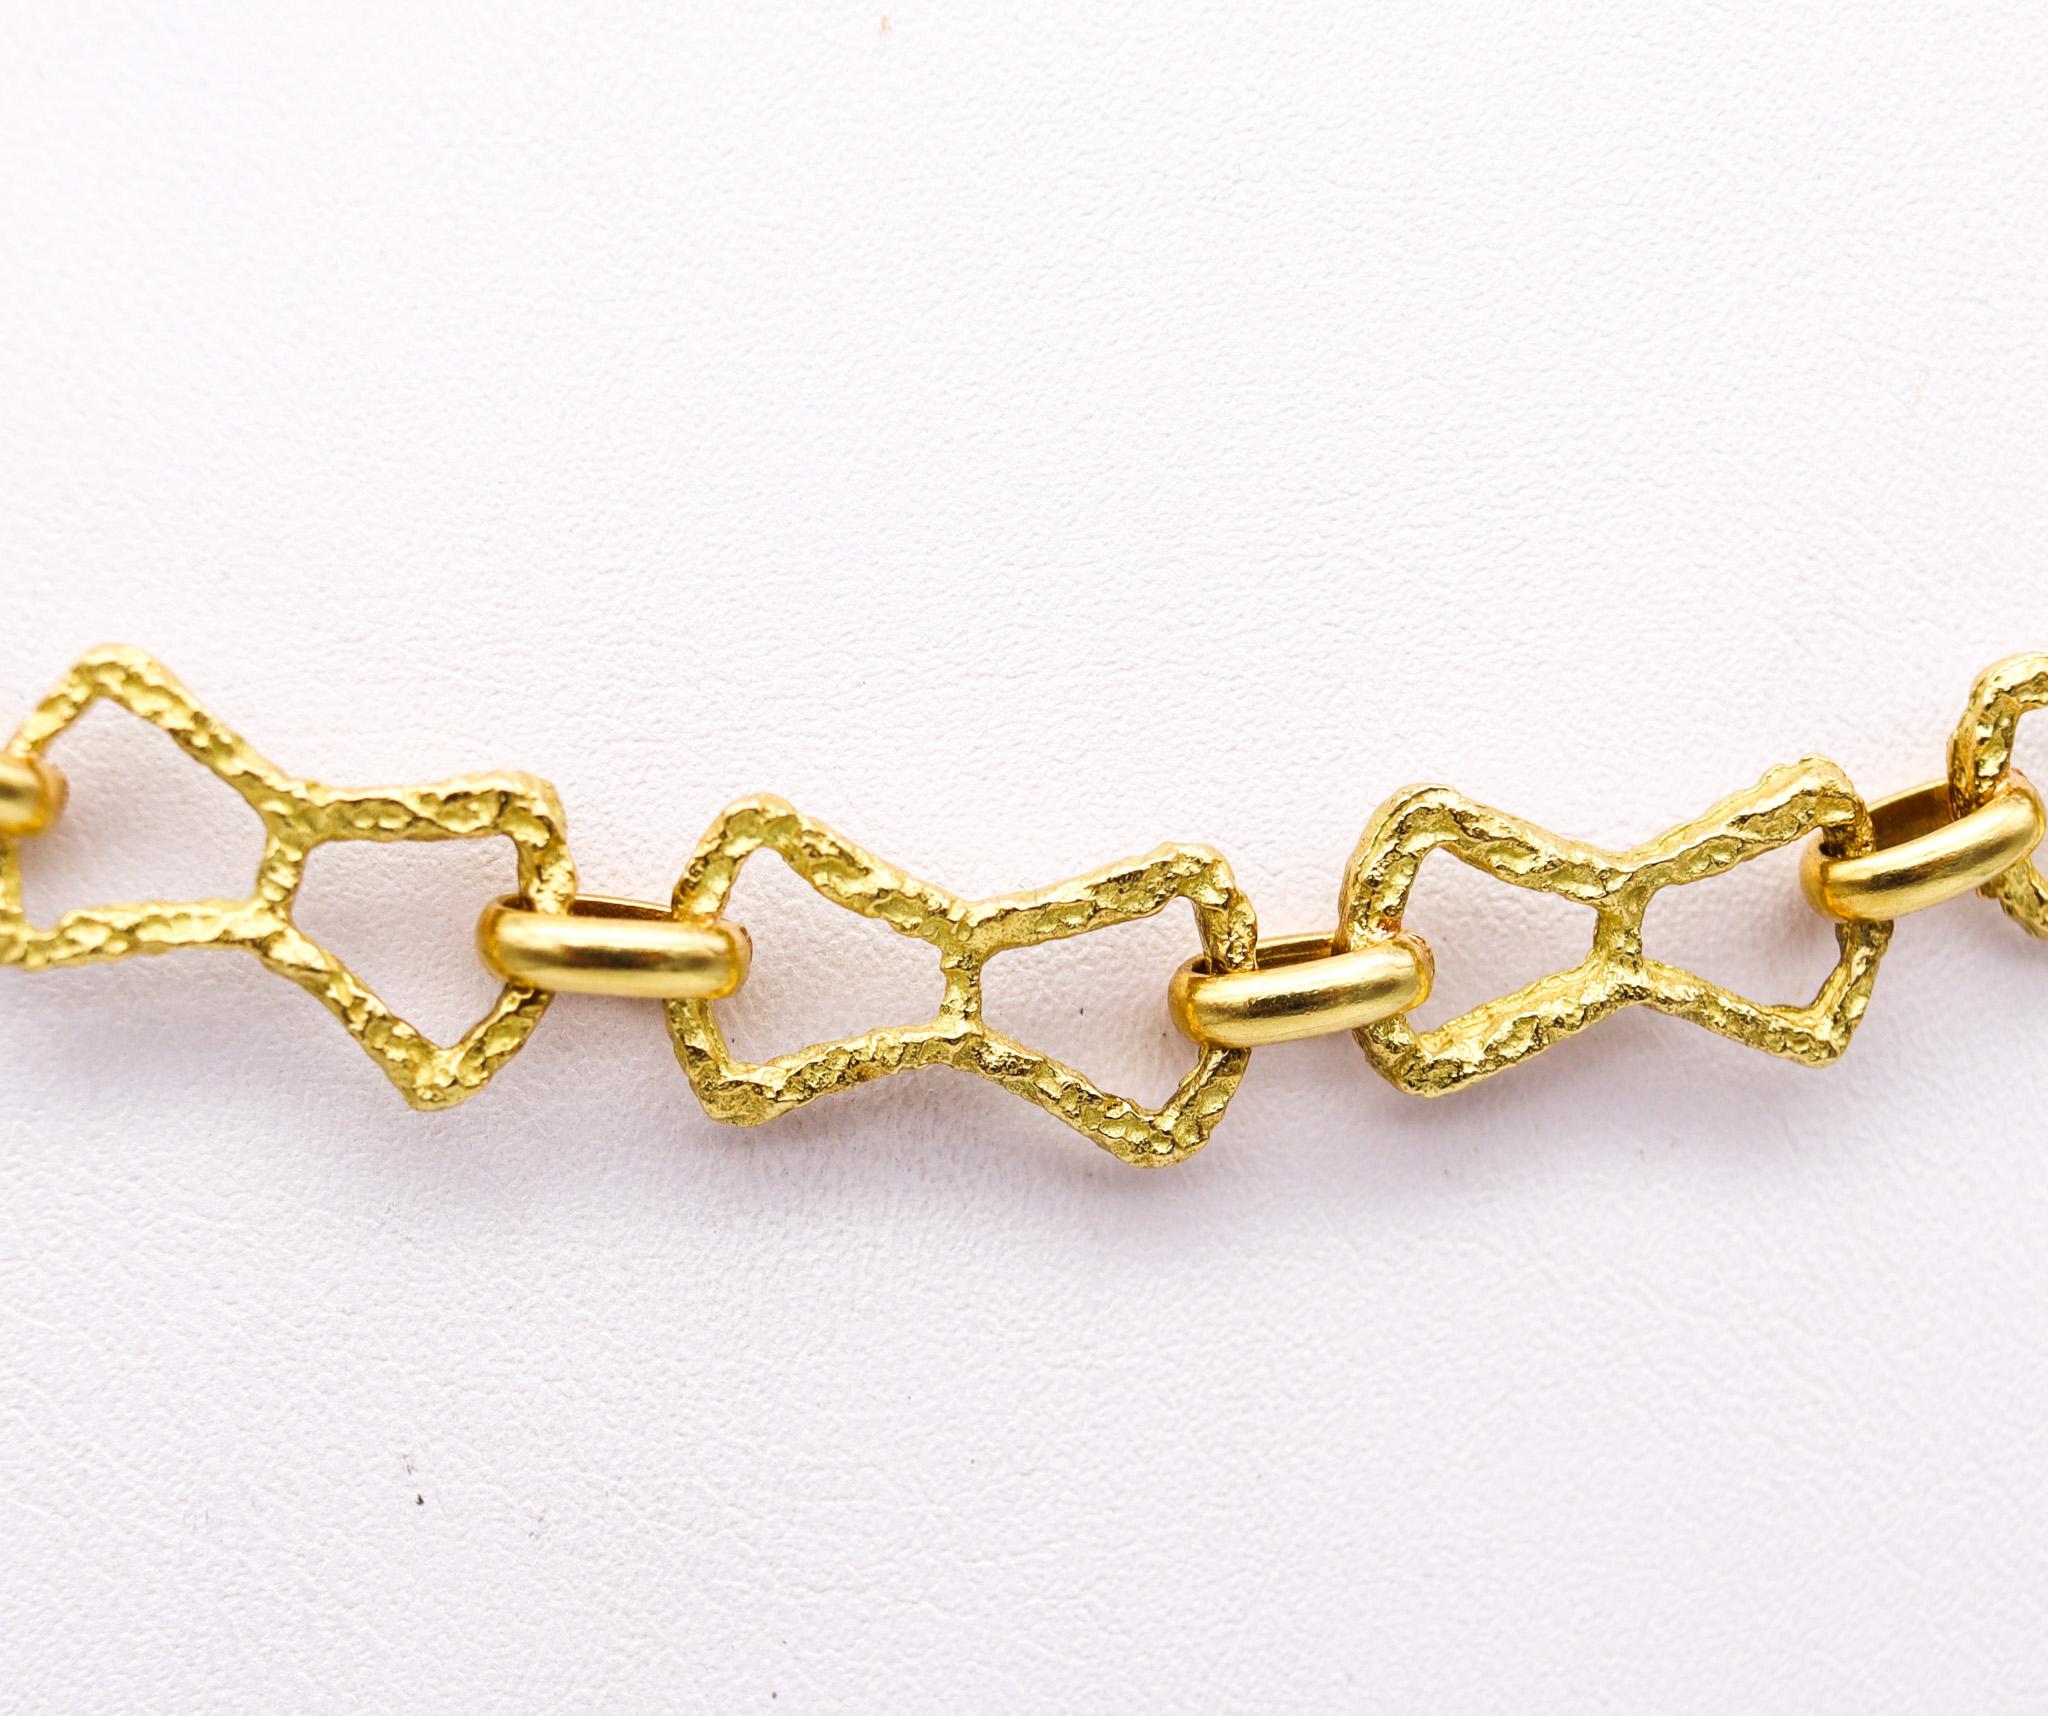 Geometric textured retro-modern chain designed by Domenico Ganazzin. 

Beautiful chain with retro modernist, created in Vicenza Italy at the atelier of Domenico Ganazzin, back in the 1960's. It was crafted with multiples geometric links made up in